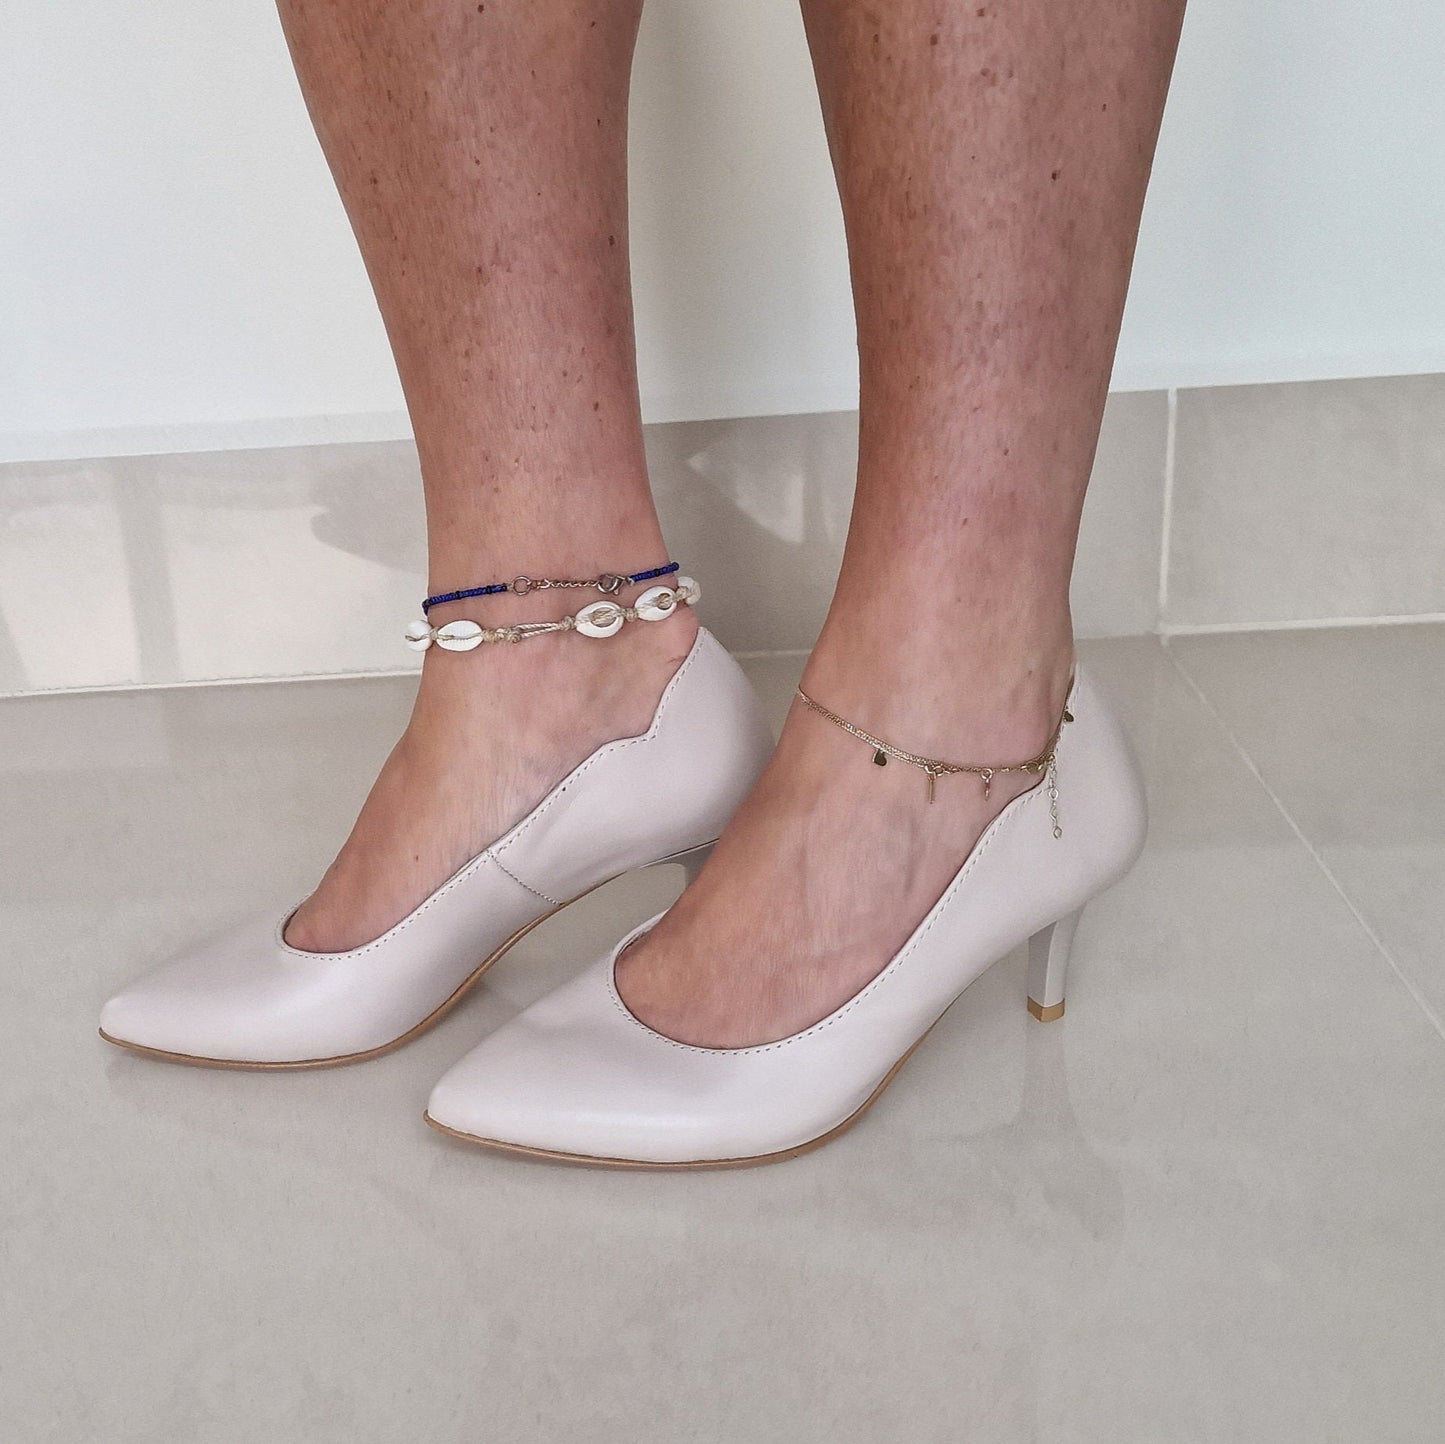 Petite nude leather court shoes set on a kitten heel